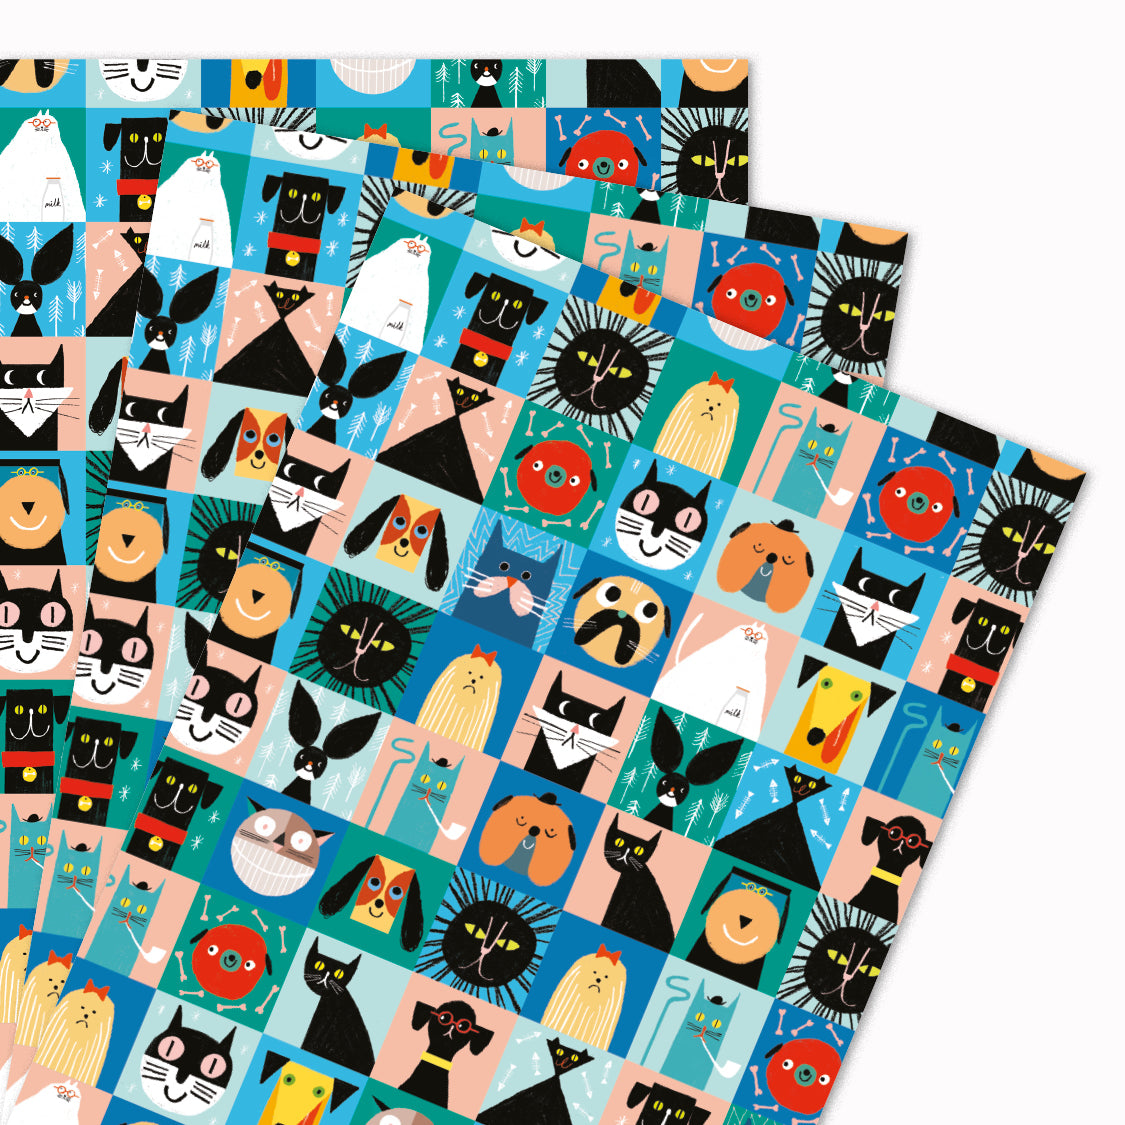 Pack of 'Cats and Dogs' gift wrap sheets illustrated by Rob Hodgson for USTUDIO Design. Perfect for cat and dog lovers alike, this bright and graphic design features funny portrait-style illustrations of our favourite furry friends.